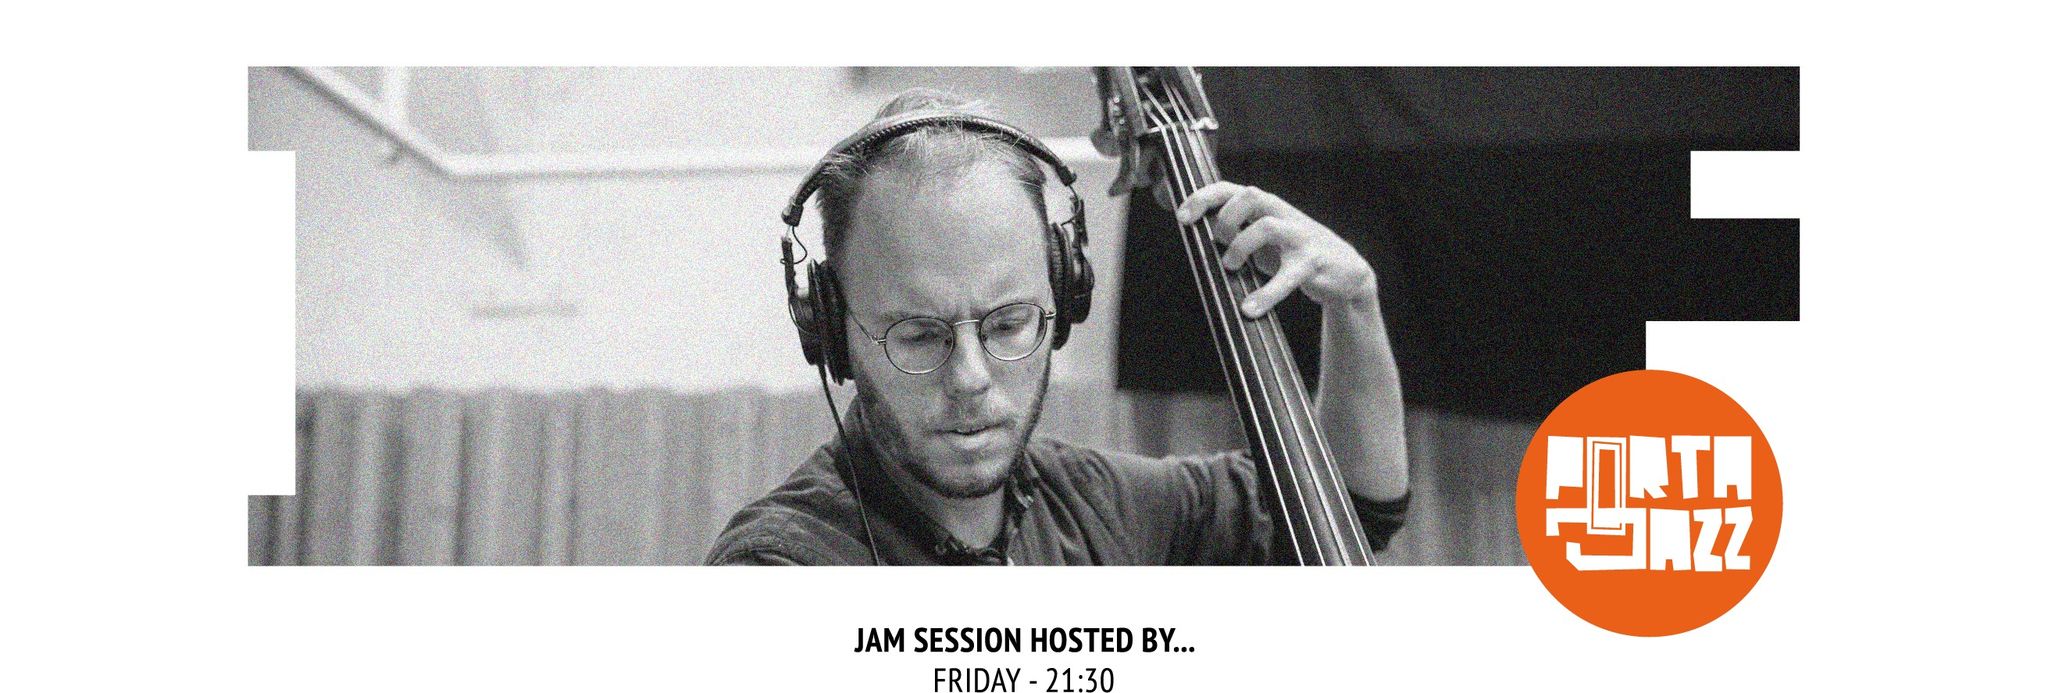 Jam Session hosted by Gianni Narduzzi